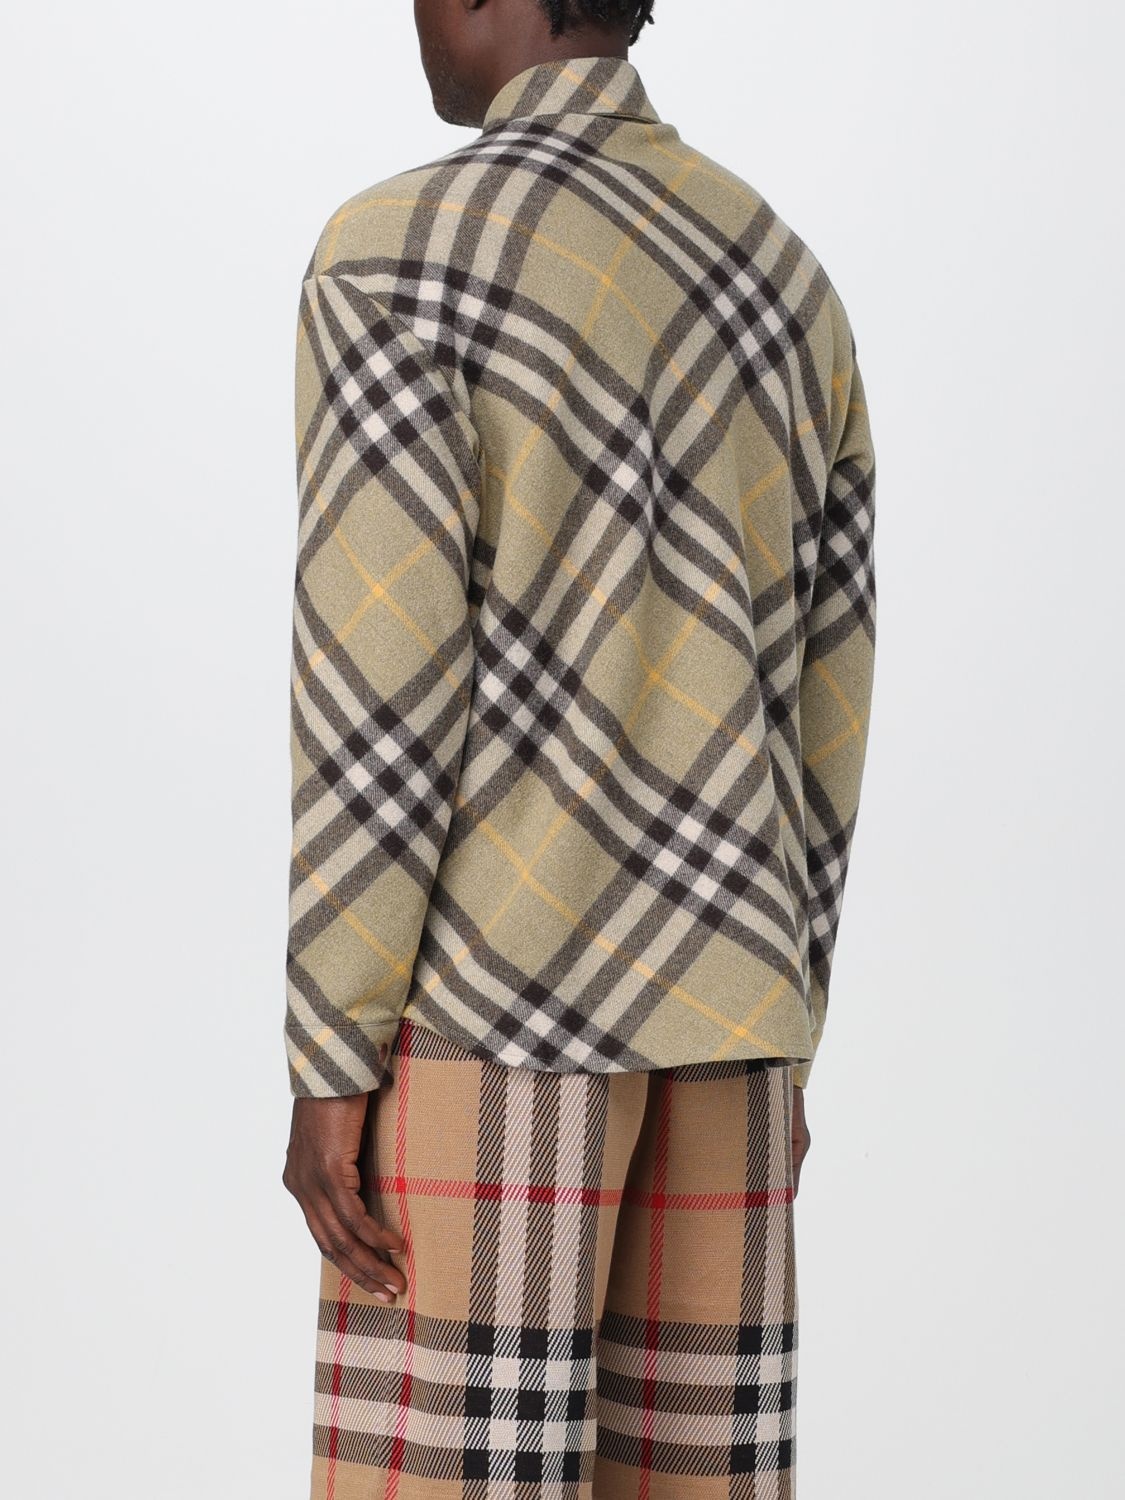 Burberry shirt in check pattern wool blend - 3